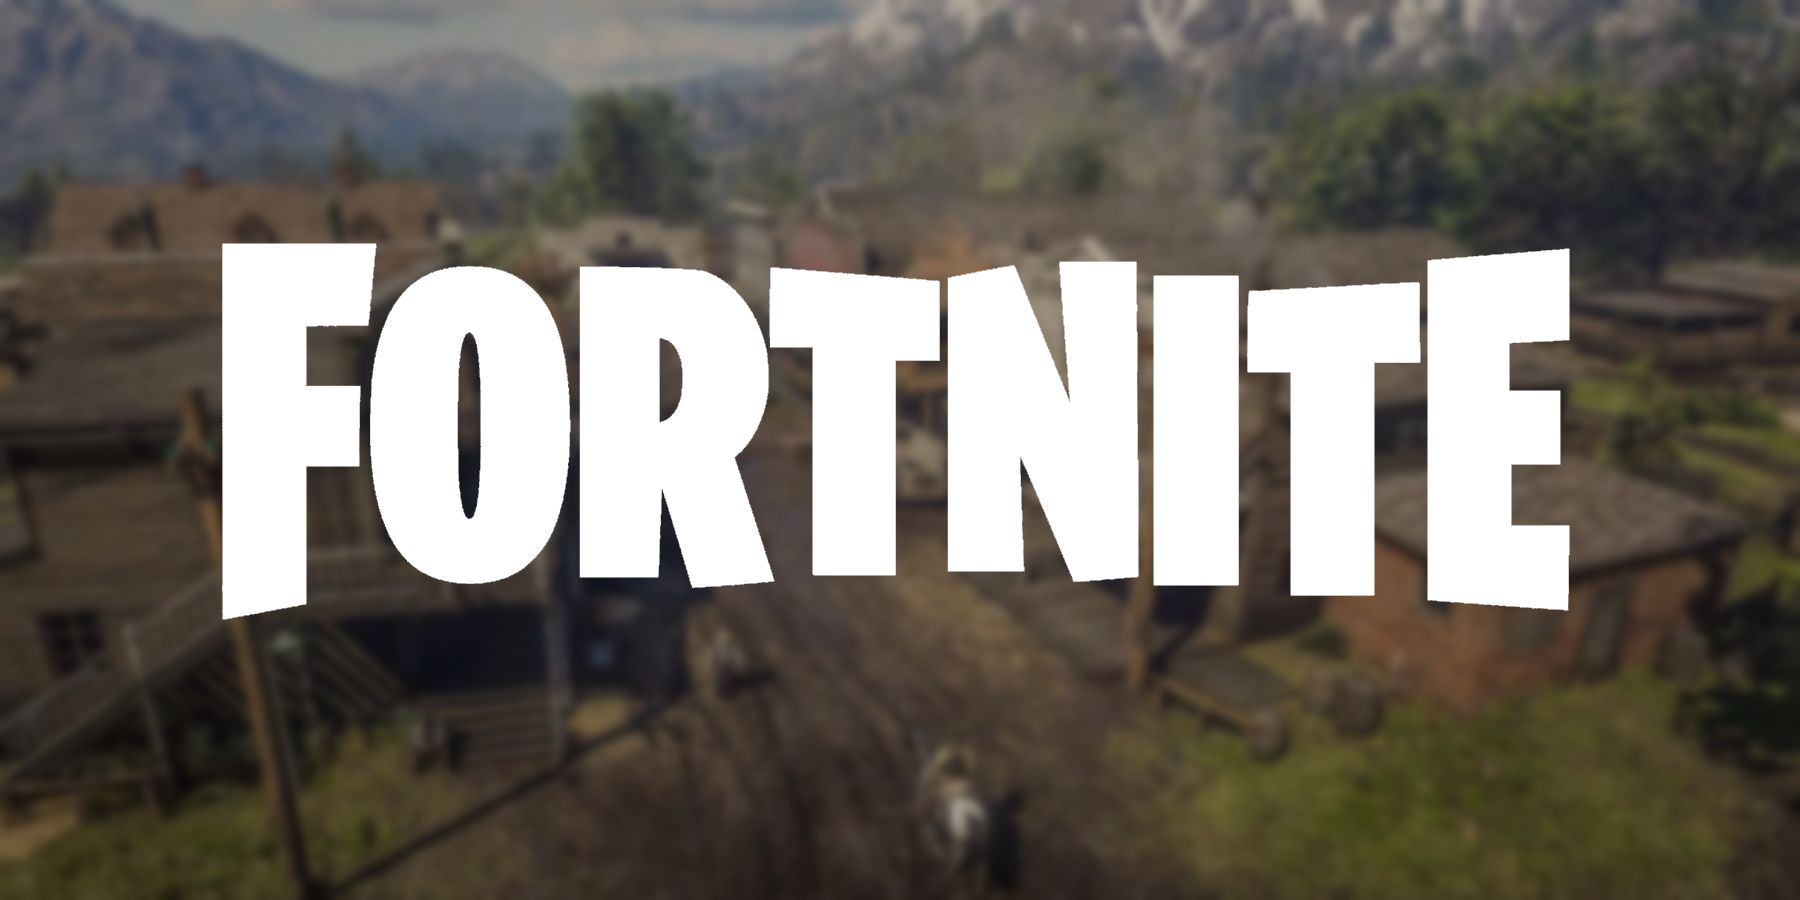 A blurred screenshot of Red Dead Redemption 2's Valentine showing the Fortnite logo.